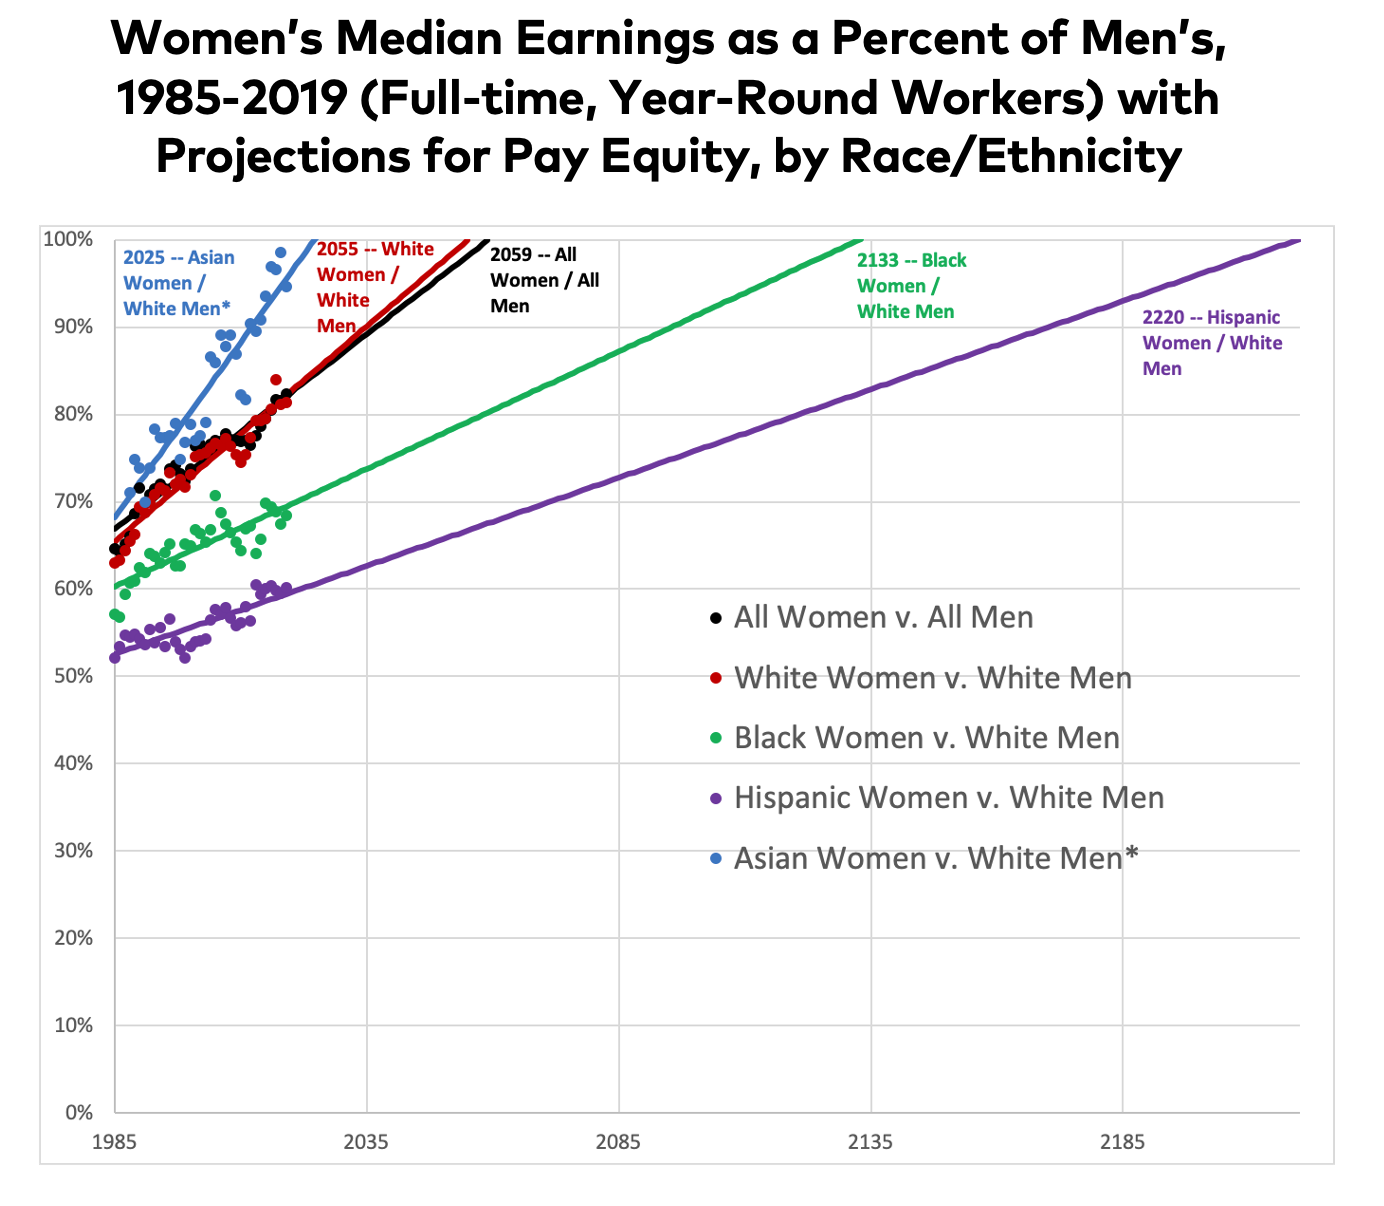 2020 Wage Gap projections for women of color